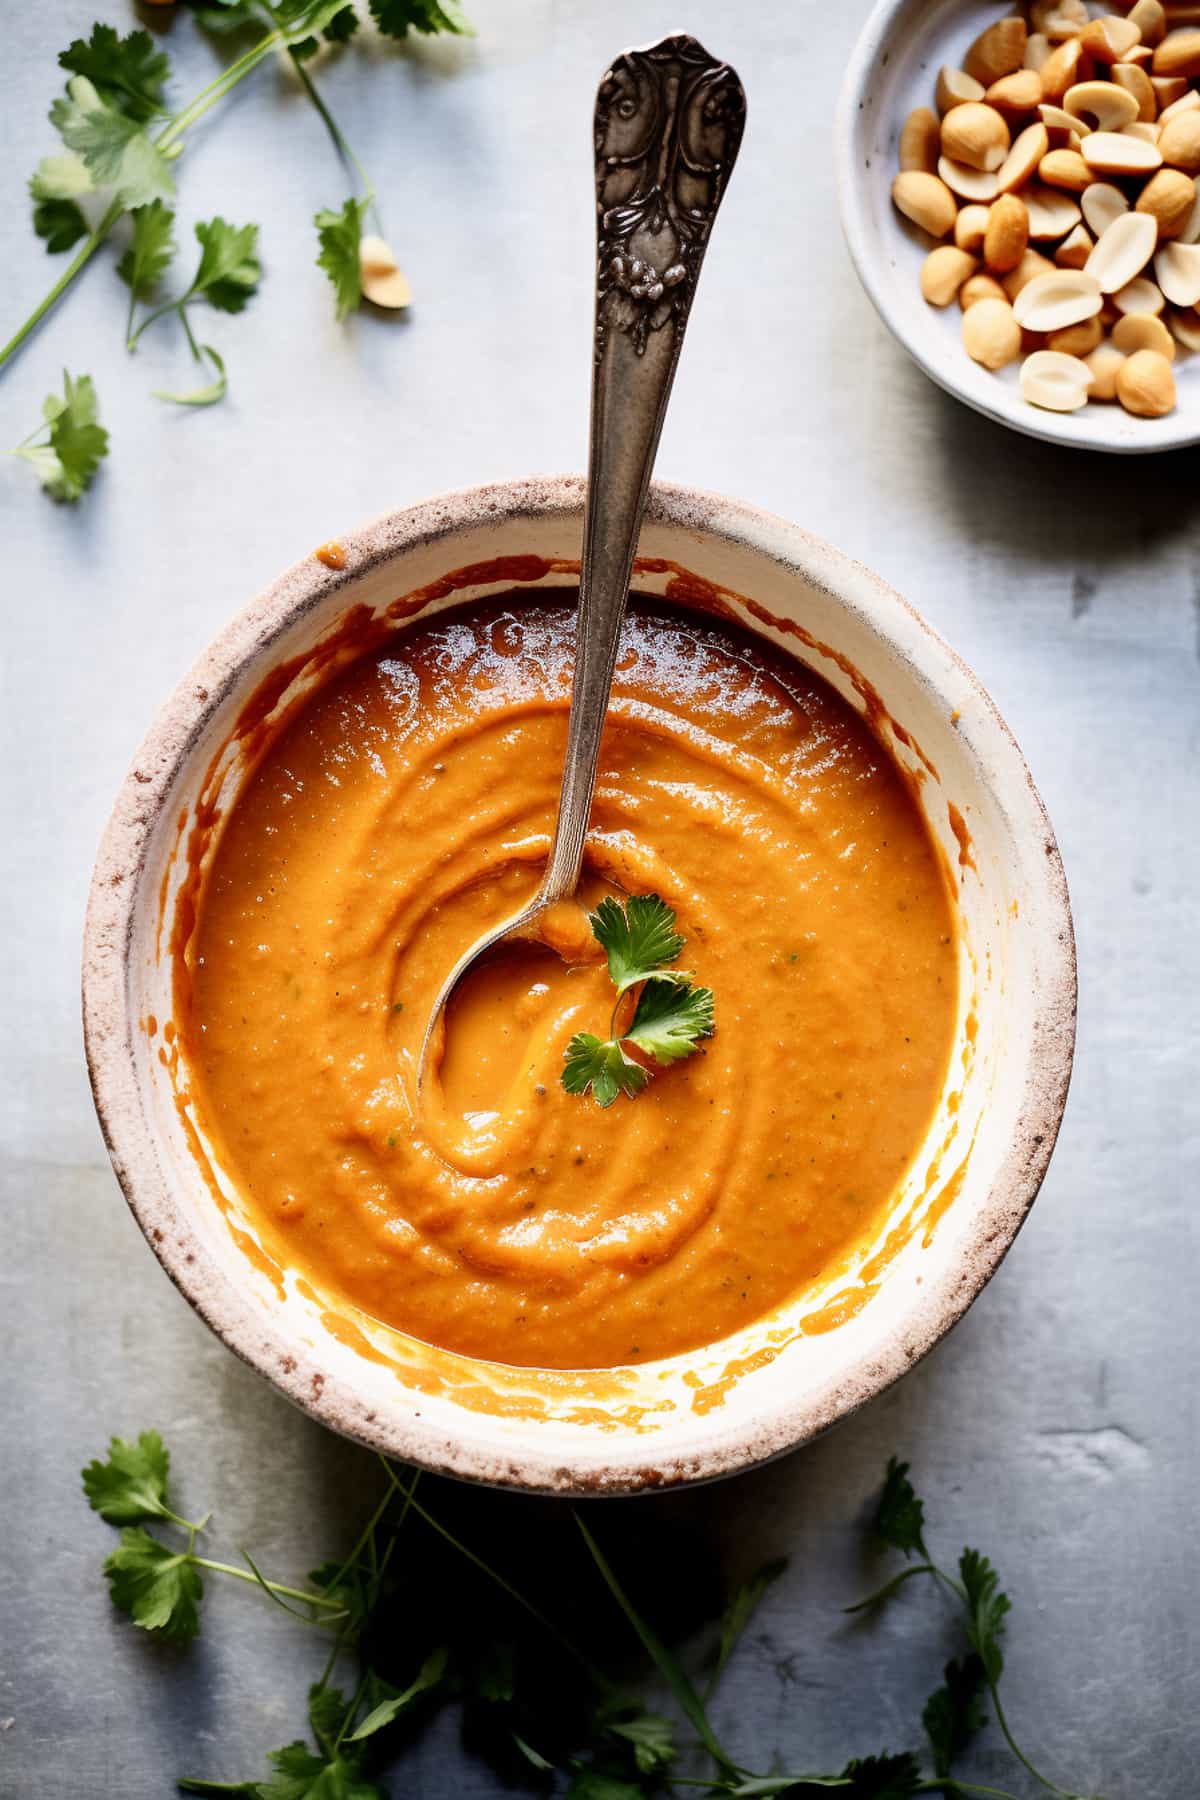 Peanut sauce for Thai noodles in a bowl.